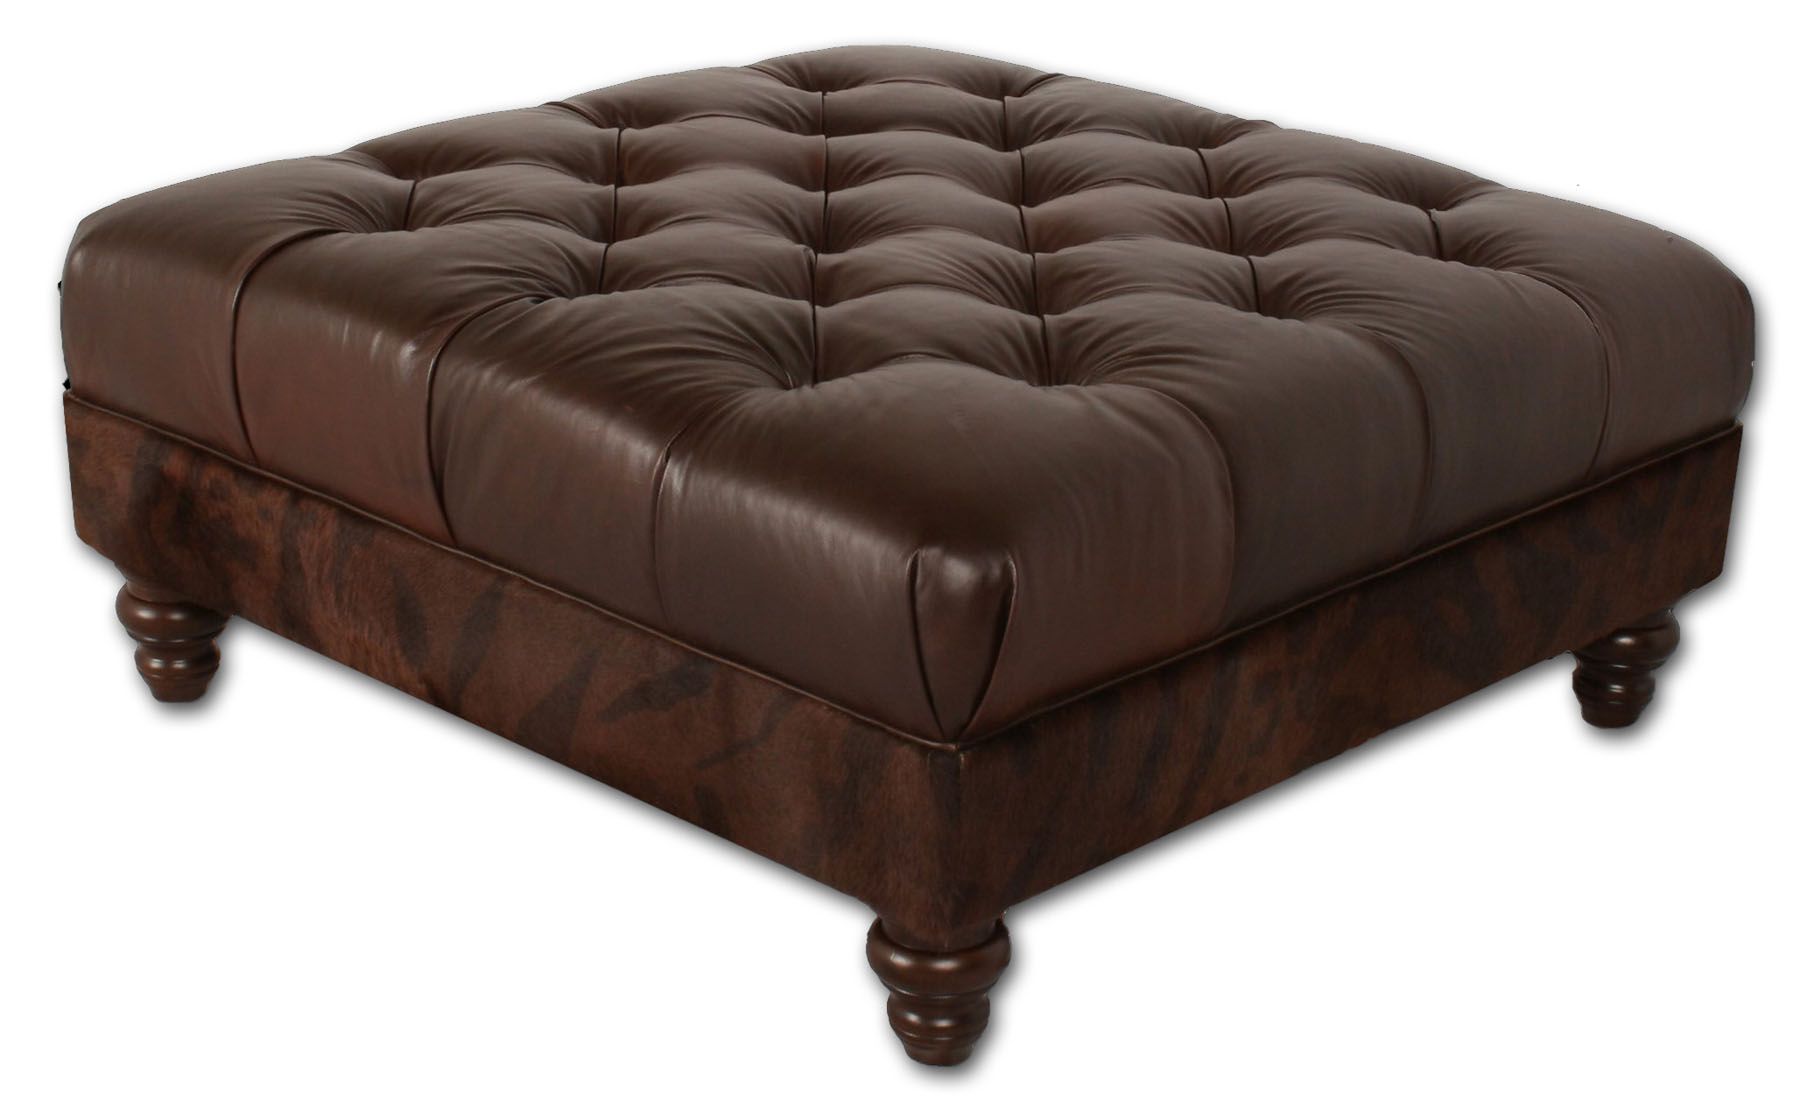 12 Round Tufted Leather Ottoman Coffee Table Inspiration Regarding White Leather And Bronze Steel Tufted Square Ottomans (View 7 of 20)